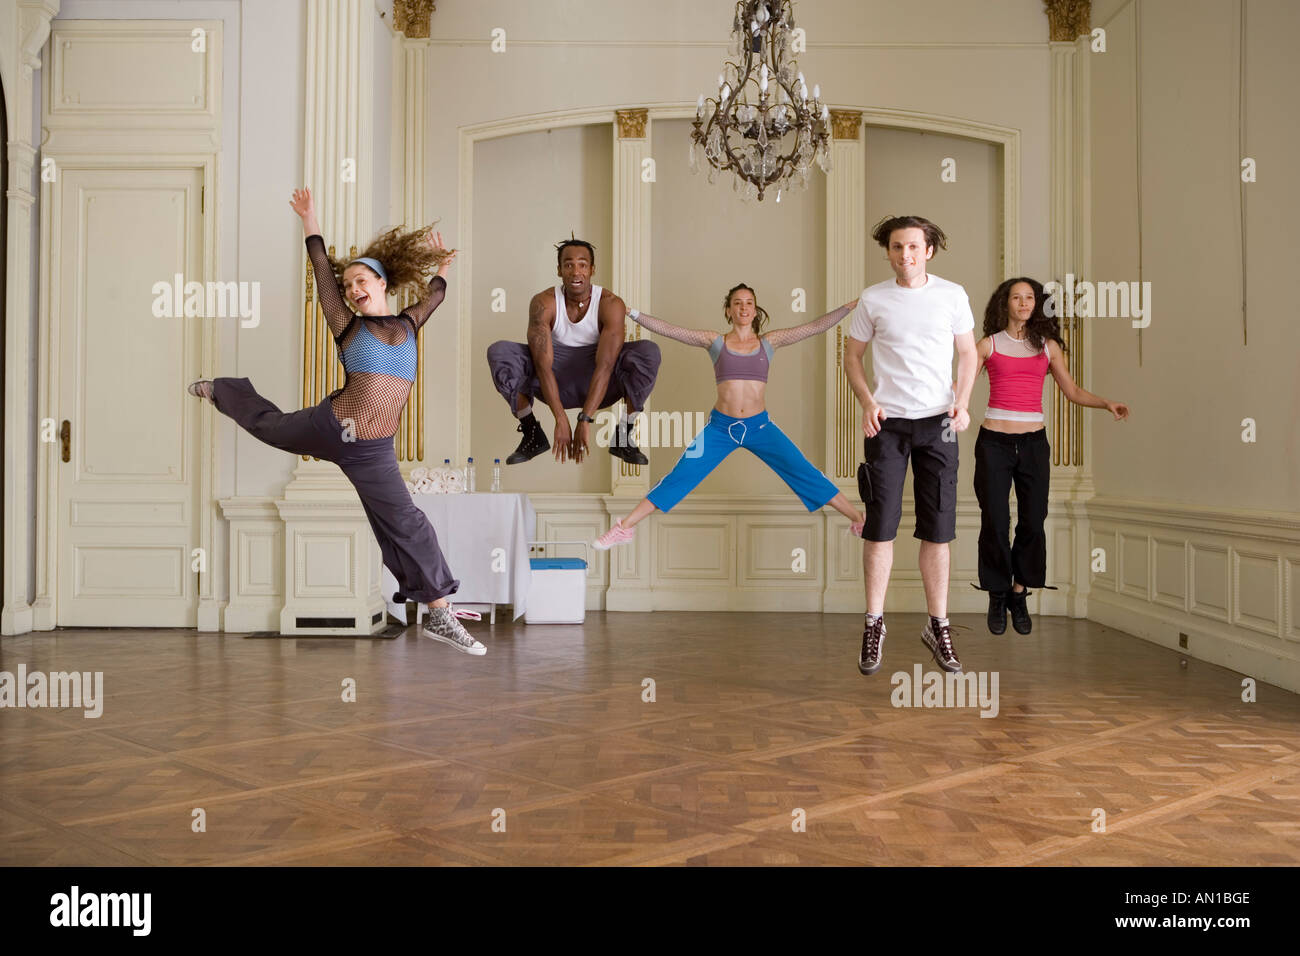 Group of people jumping in dance class Stock Photo